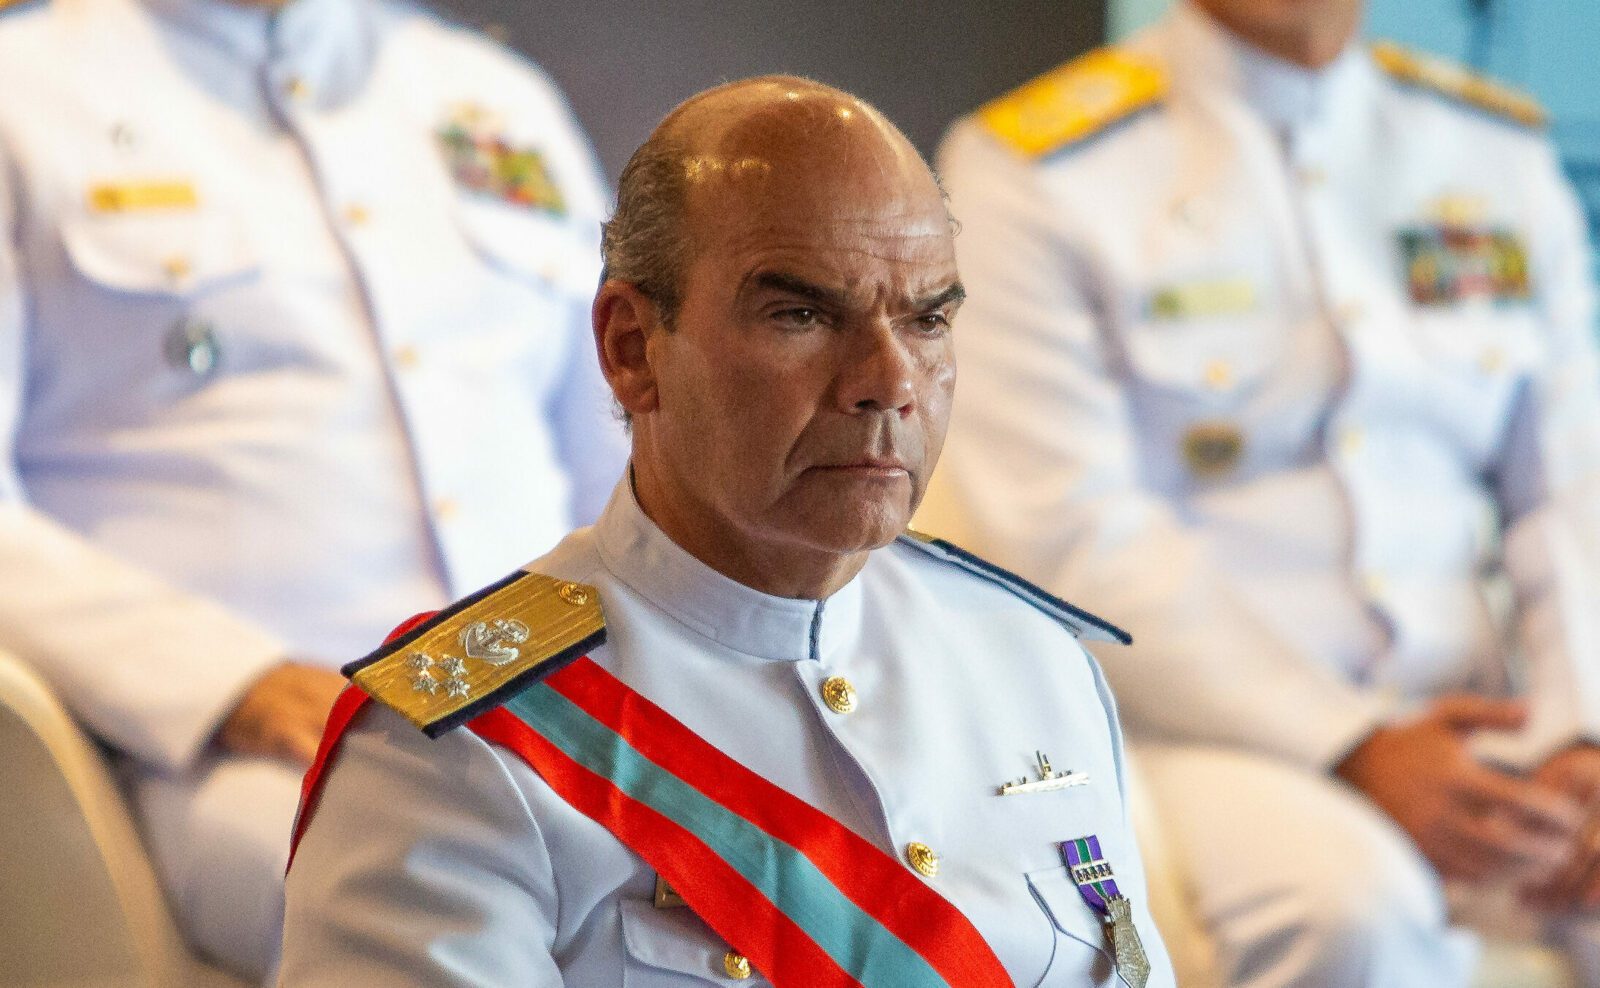 "The Brazilian Navy is in crisis," says commander